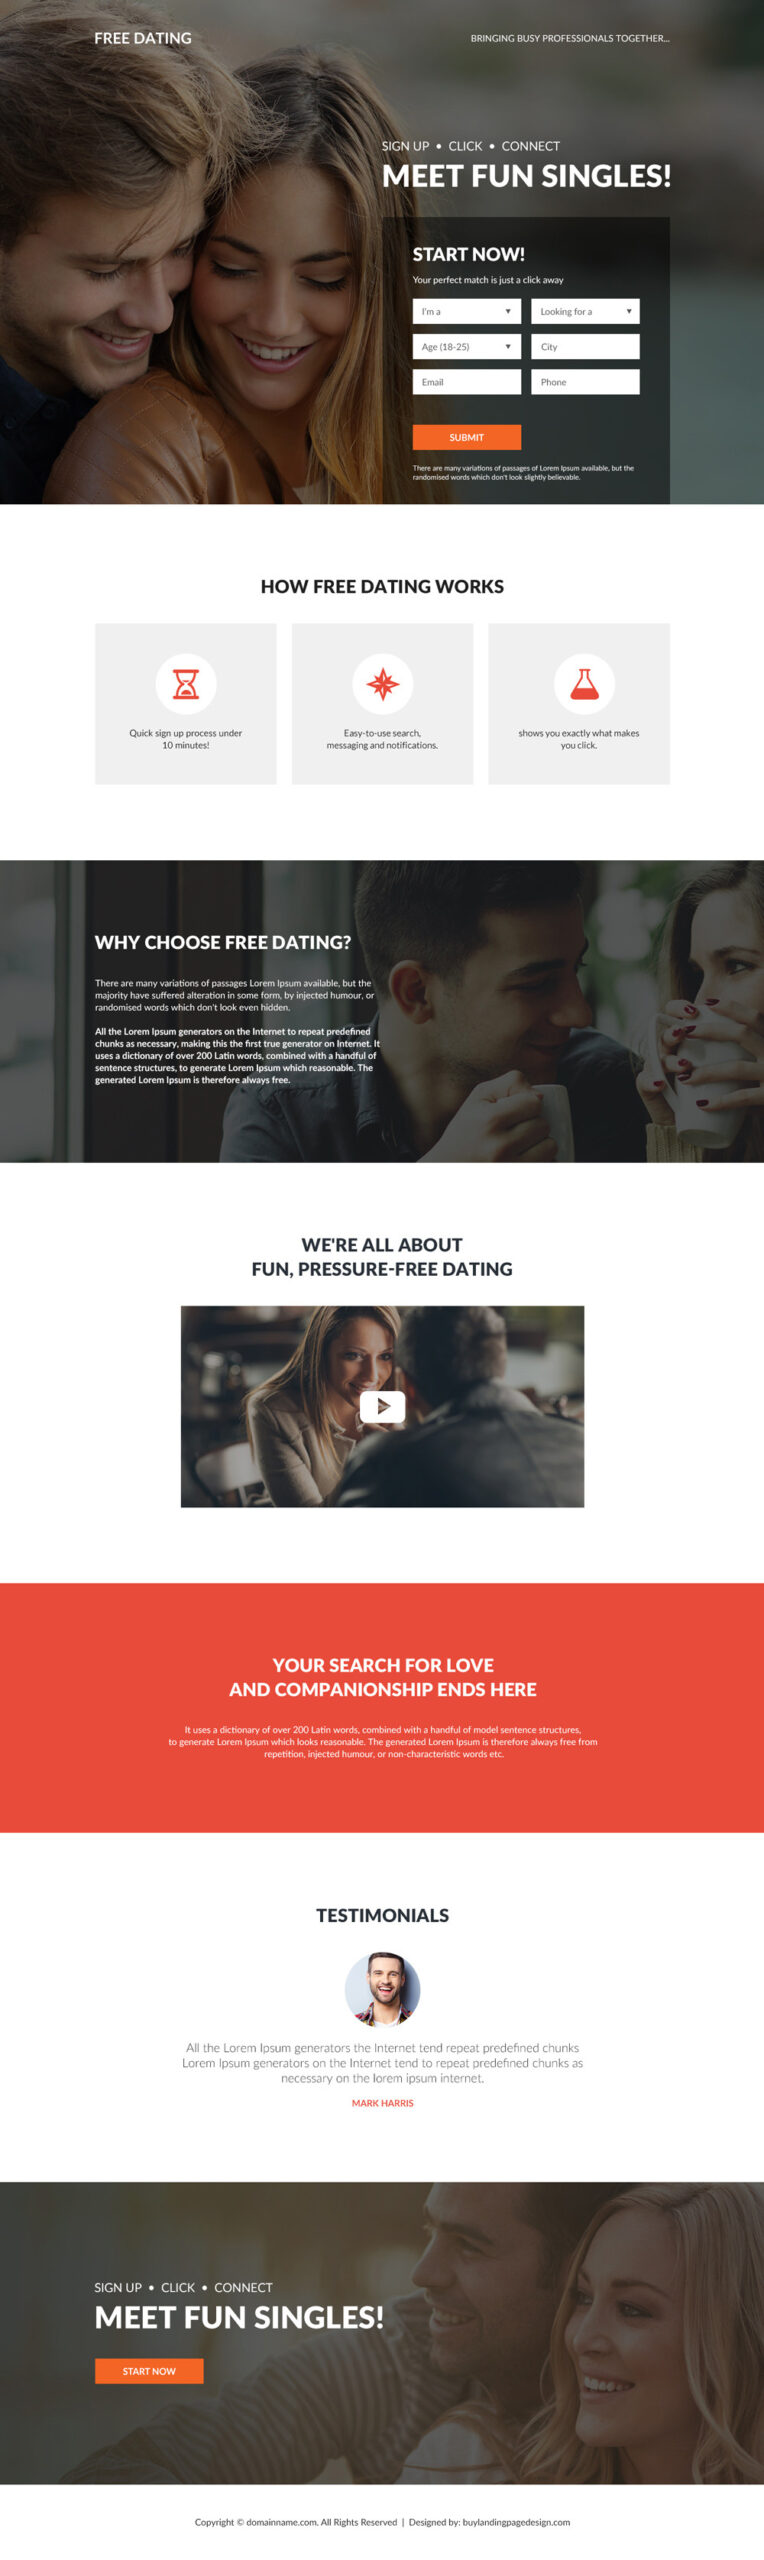 High converting dating landing page